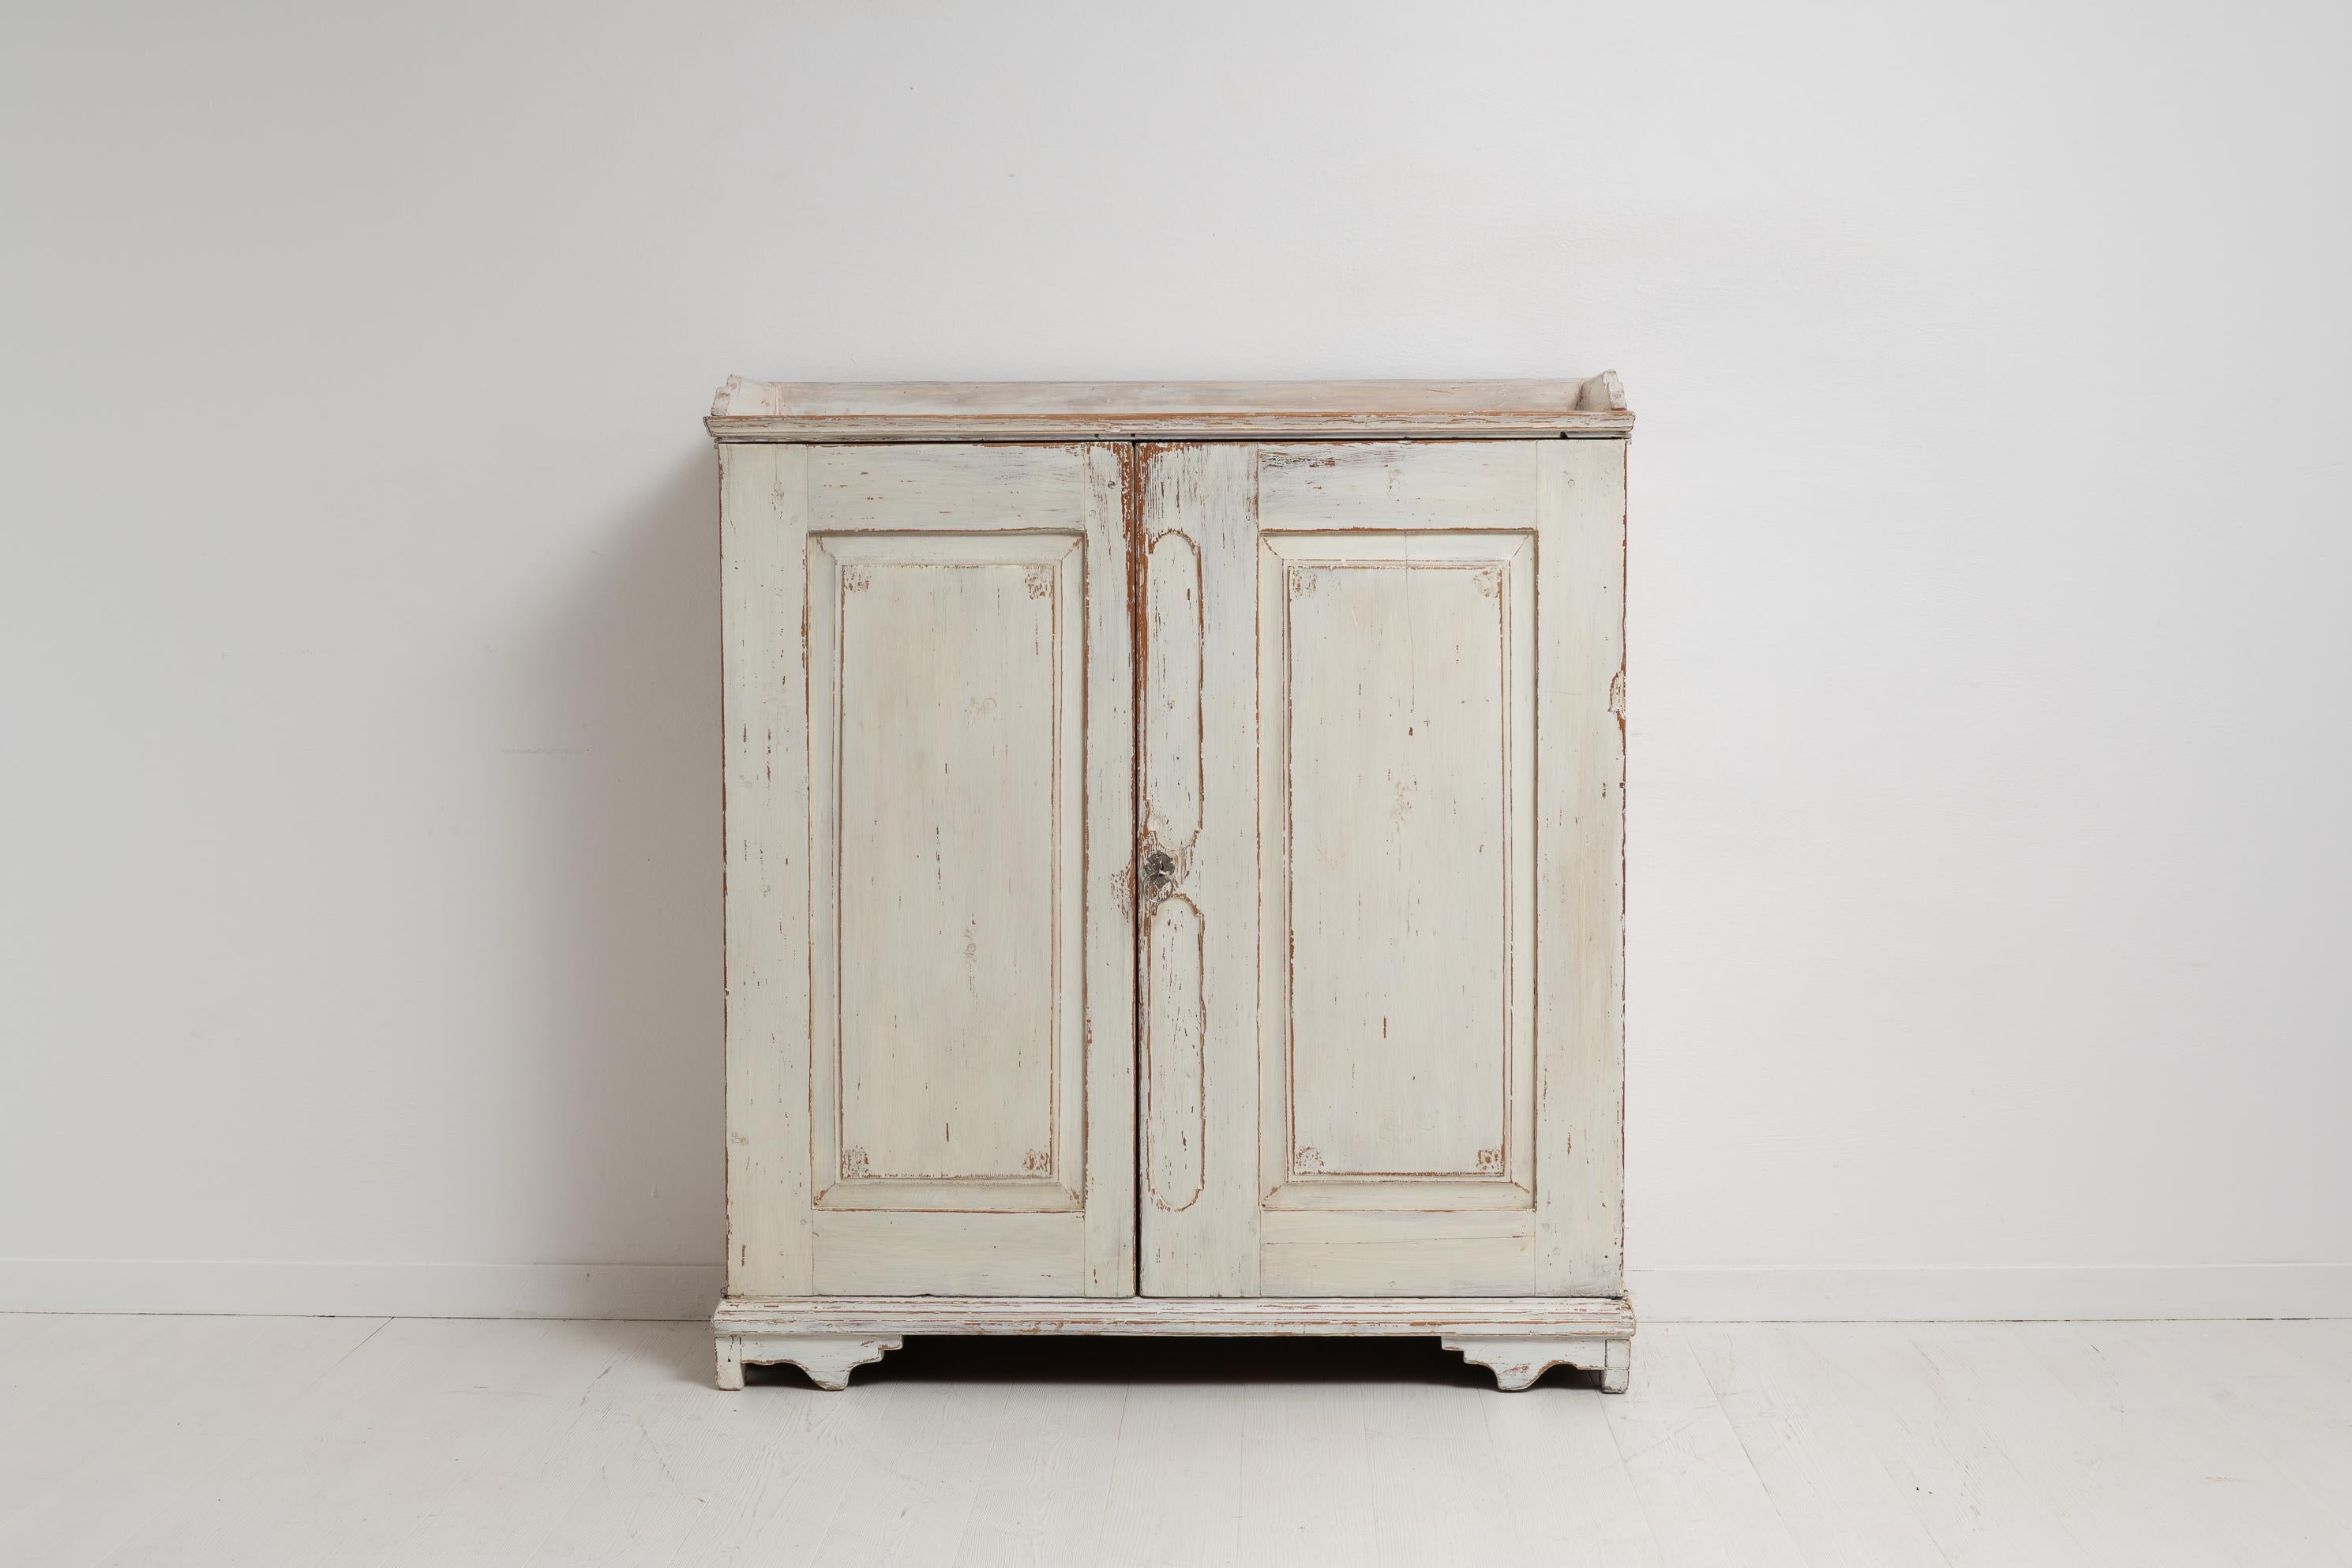 Swedish country home sideboard in gustavian style from the early 19th century. This country furniture is from around 1820 to 1830 and made in painted pine. The interior has multiple small drawers as well as 3 shelves. Old renovation with paint from